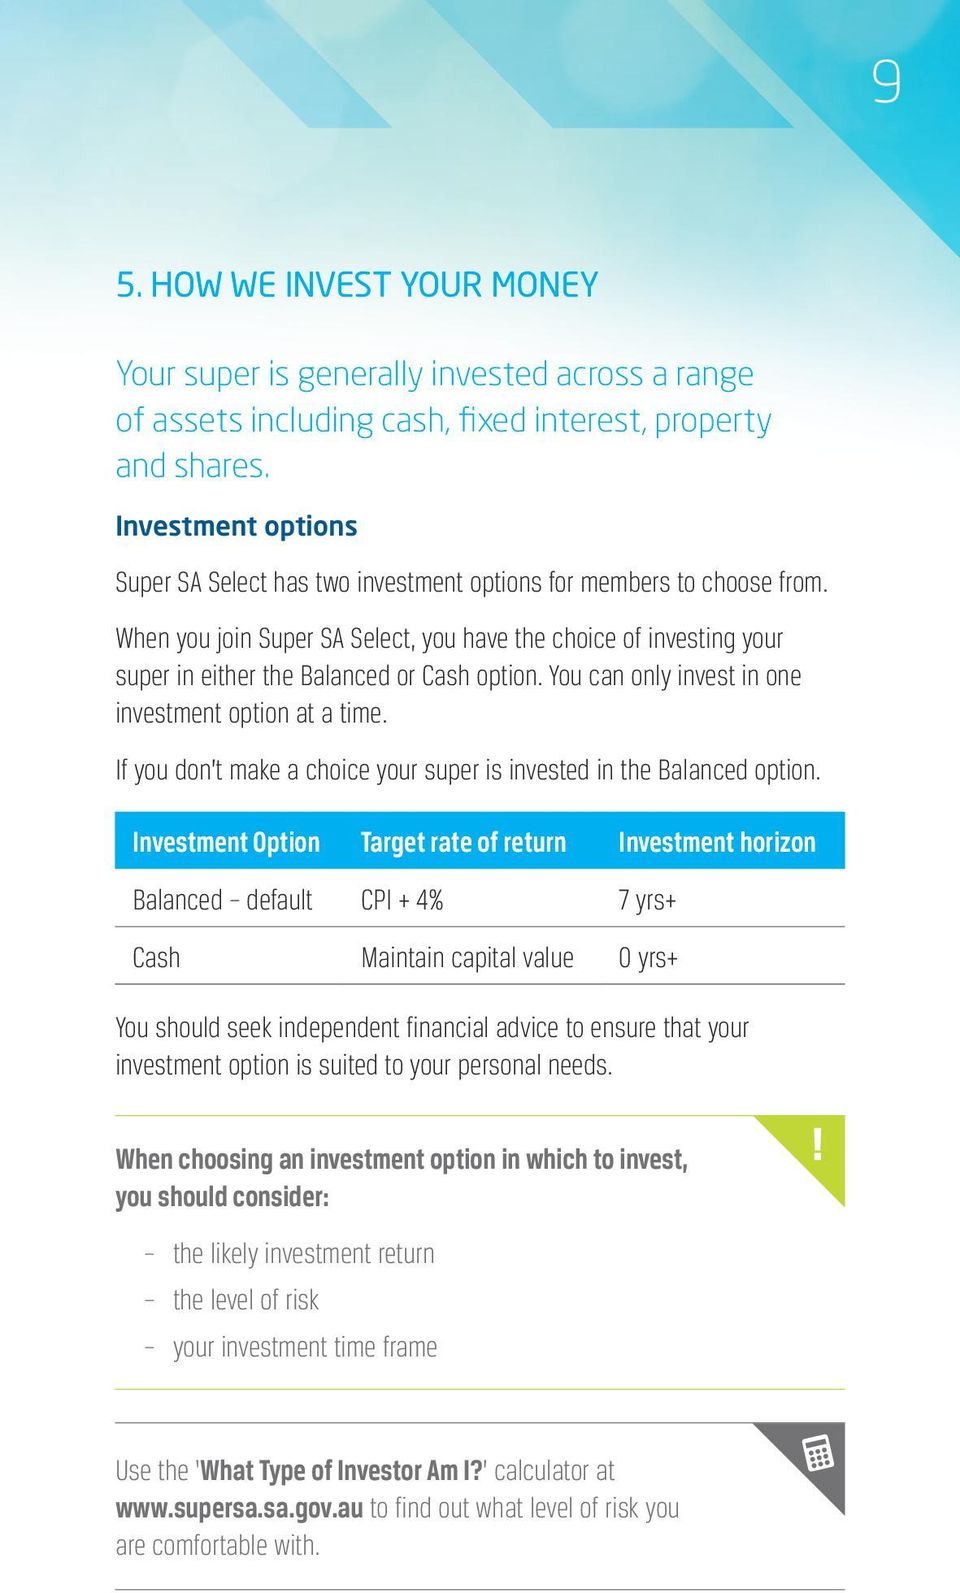 When you join Super SA Select, you have the choice of investing your super in either the Balanced or Cash option. You can only invest in one investment option at a time.